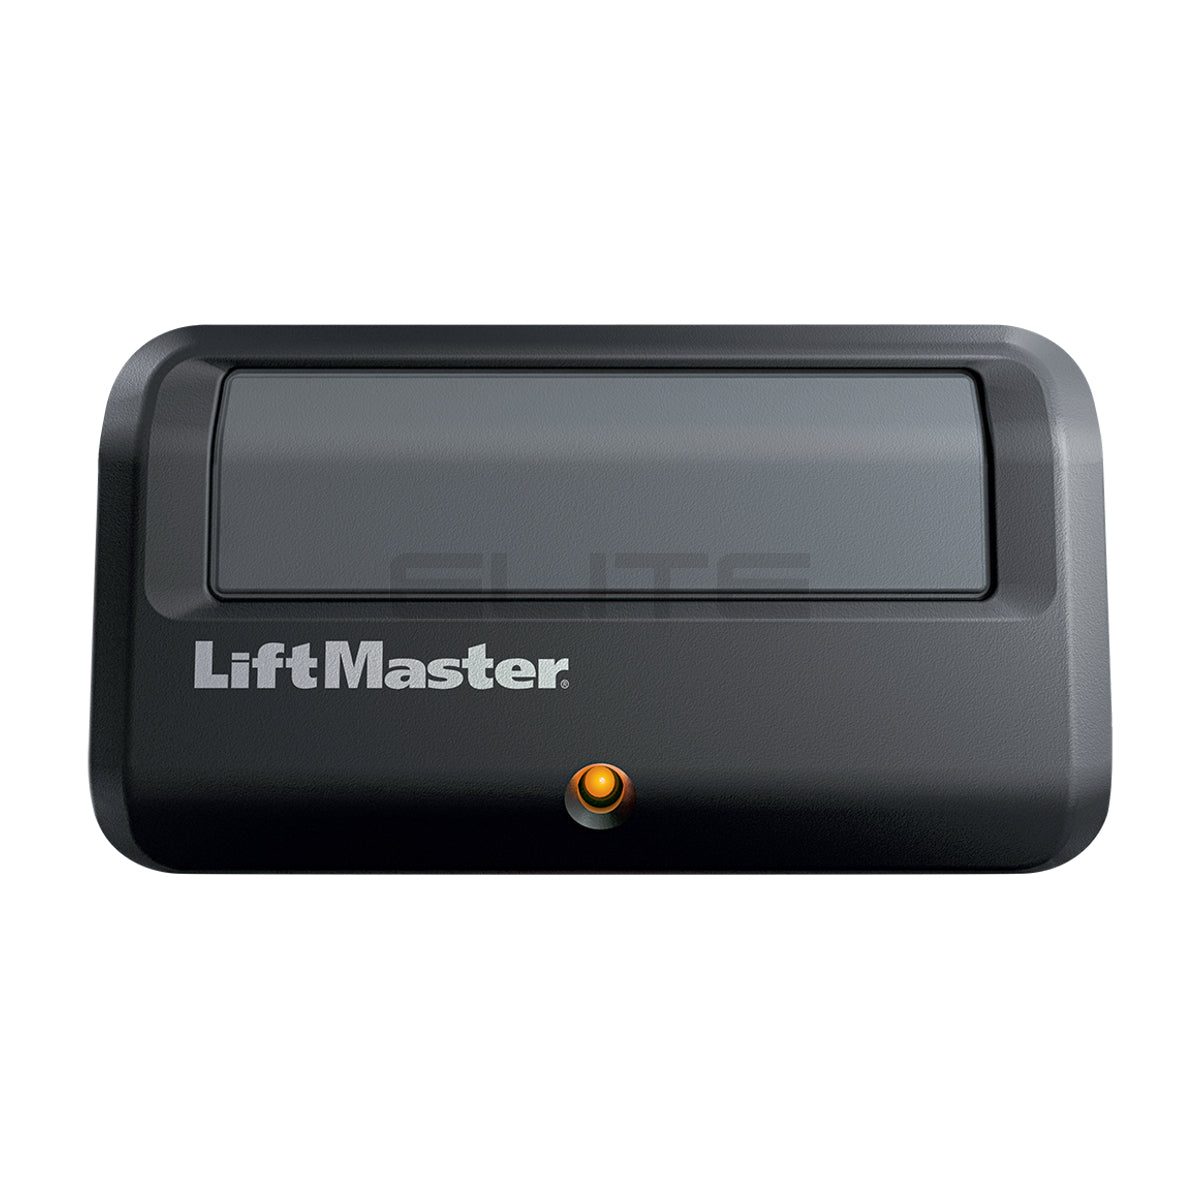 Liftmaster 891lm Gate and Garage Remote Control FRONT VIEW